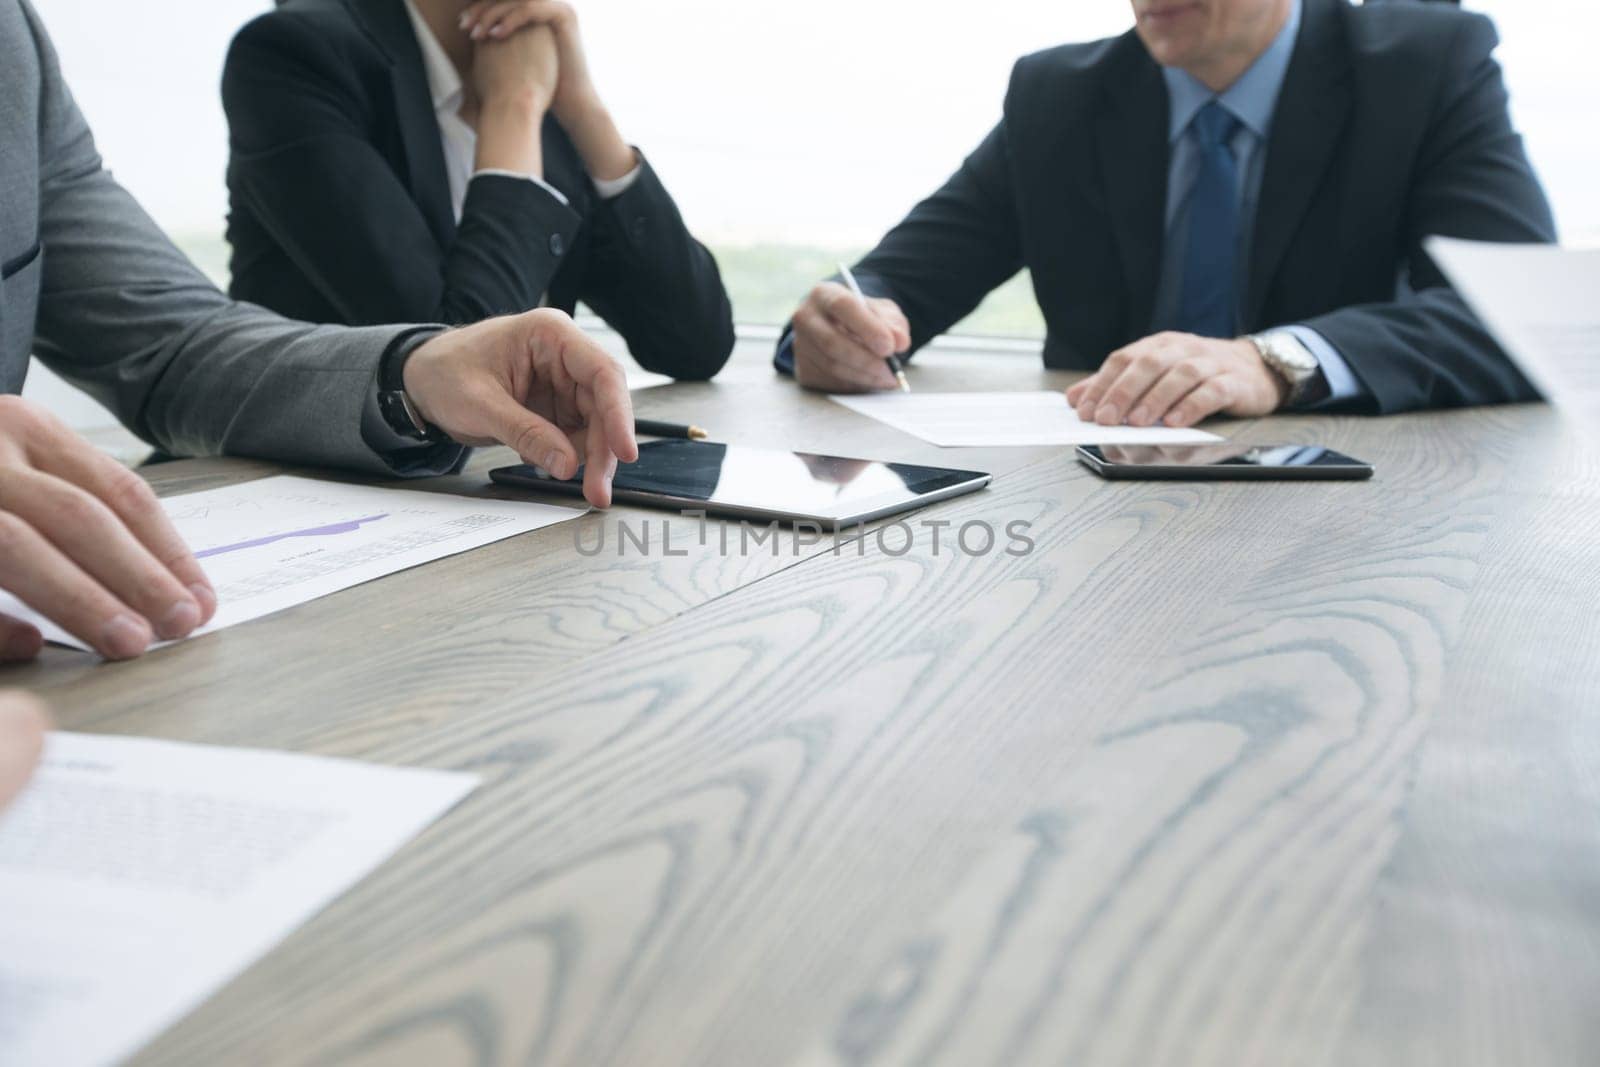 Abstract Image of business people meeting at office table with smart phone and digital tablet and coworkers working in the background